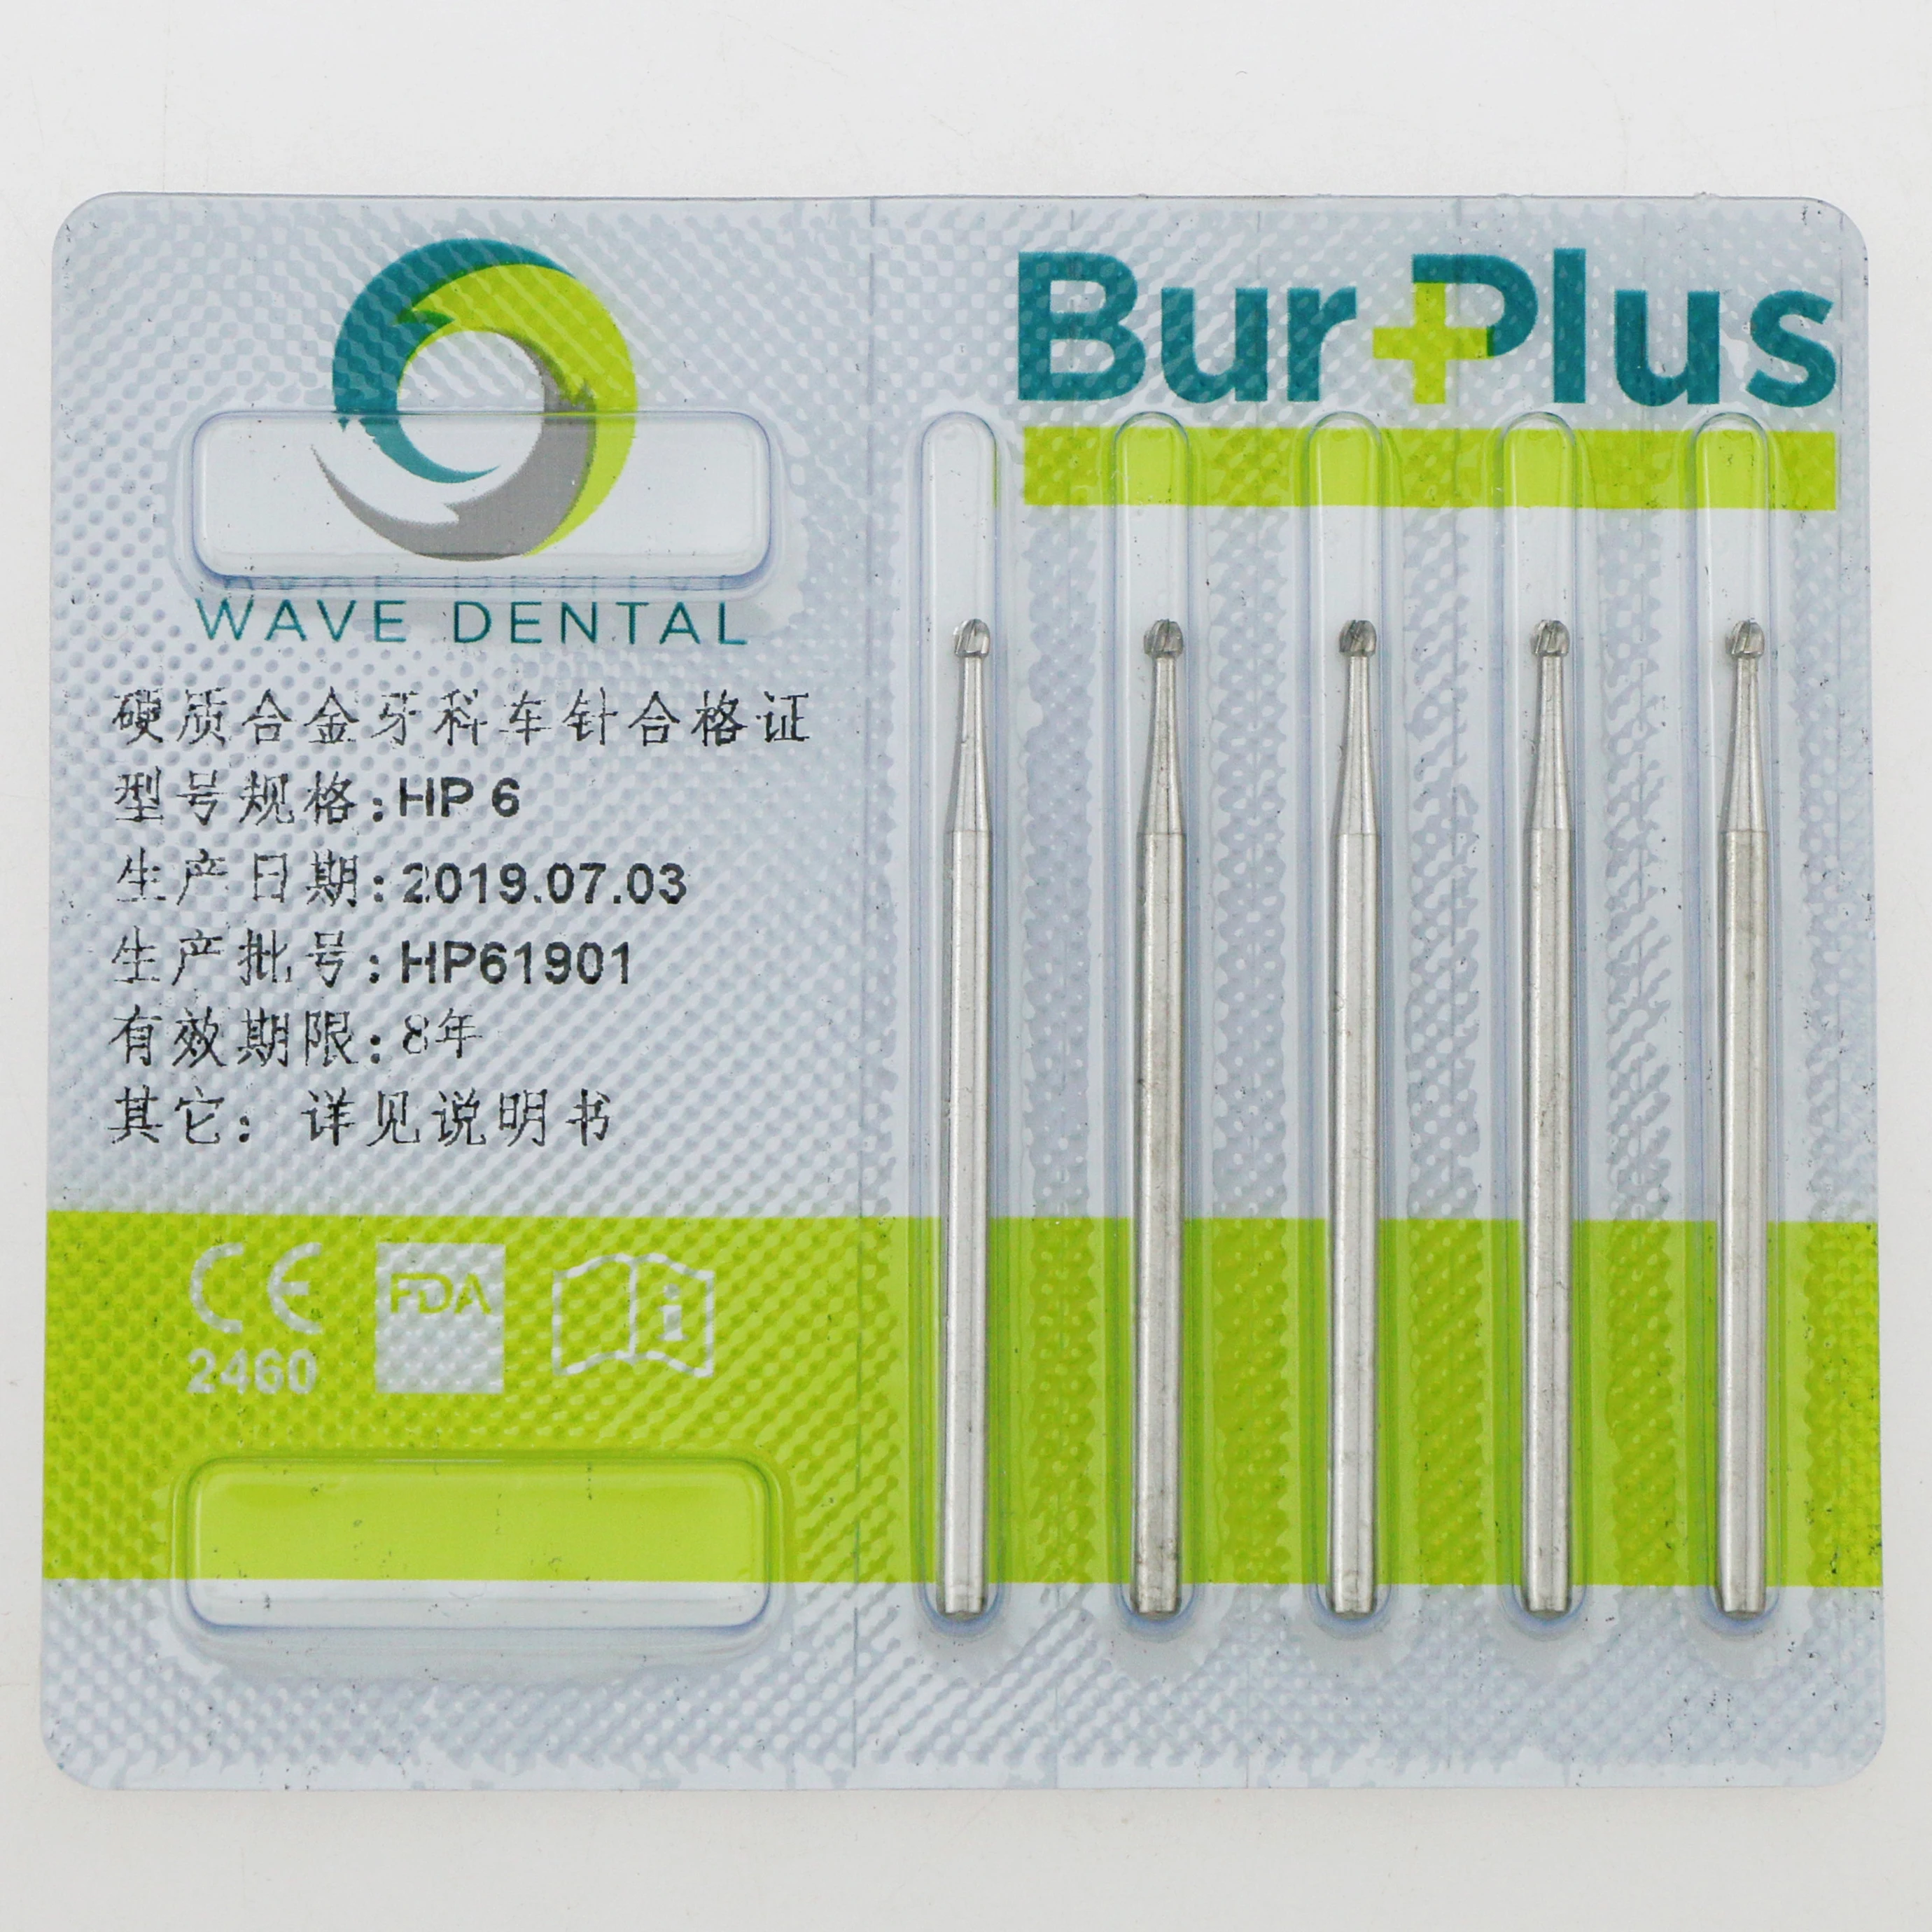 5Pc/Pack WAVE Dental Tungsten Carbide Bur HP 6 Head 1.8mm Round Drills Burs For Low Speed Straight Nose Cone Handpiece 2.35mm t38 euro handpiece jewelry tools suit foredom flex shaft handle quick change 2 35mm head